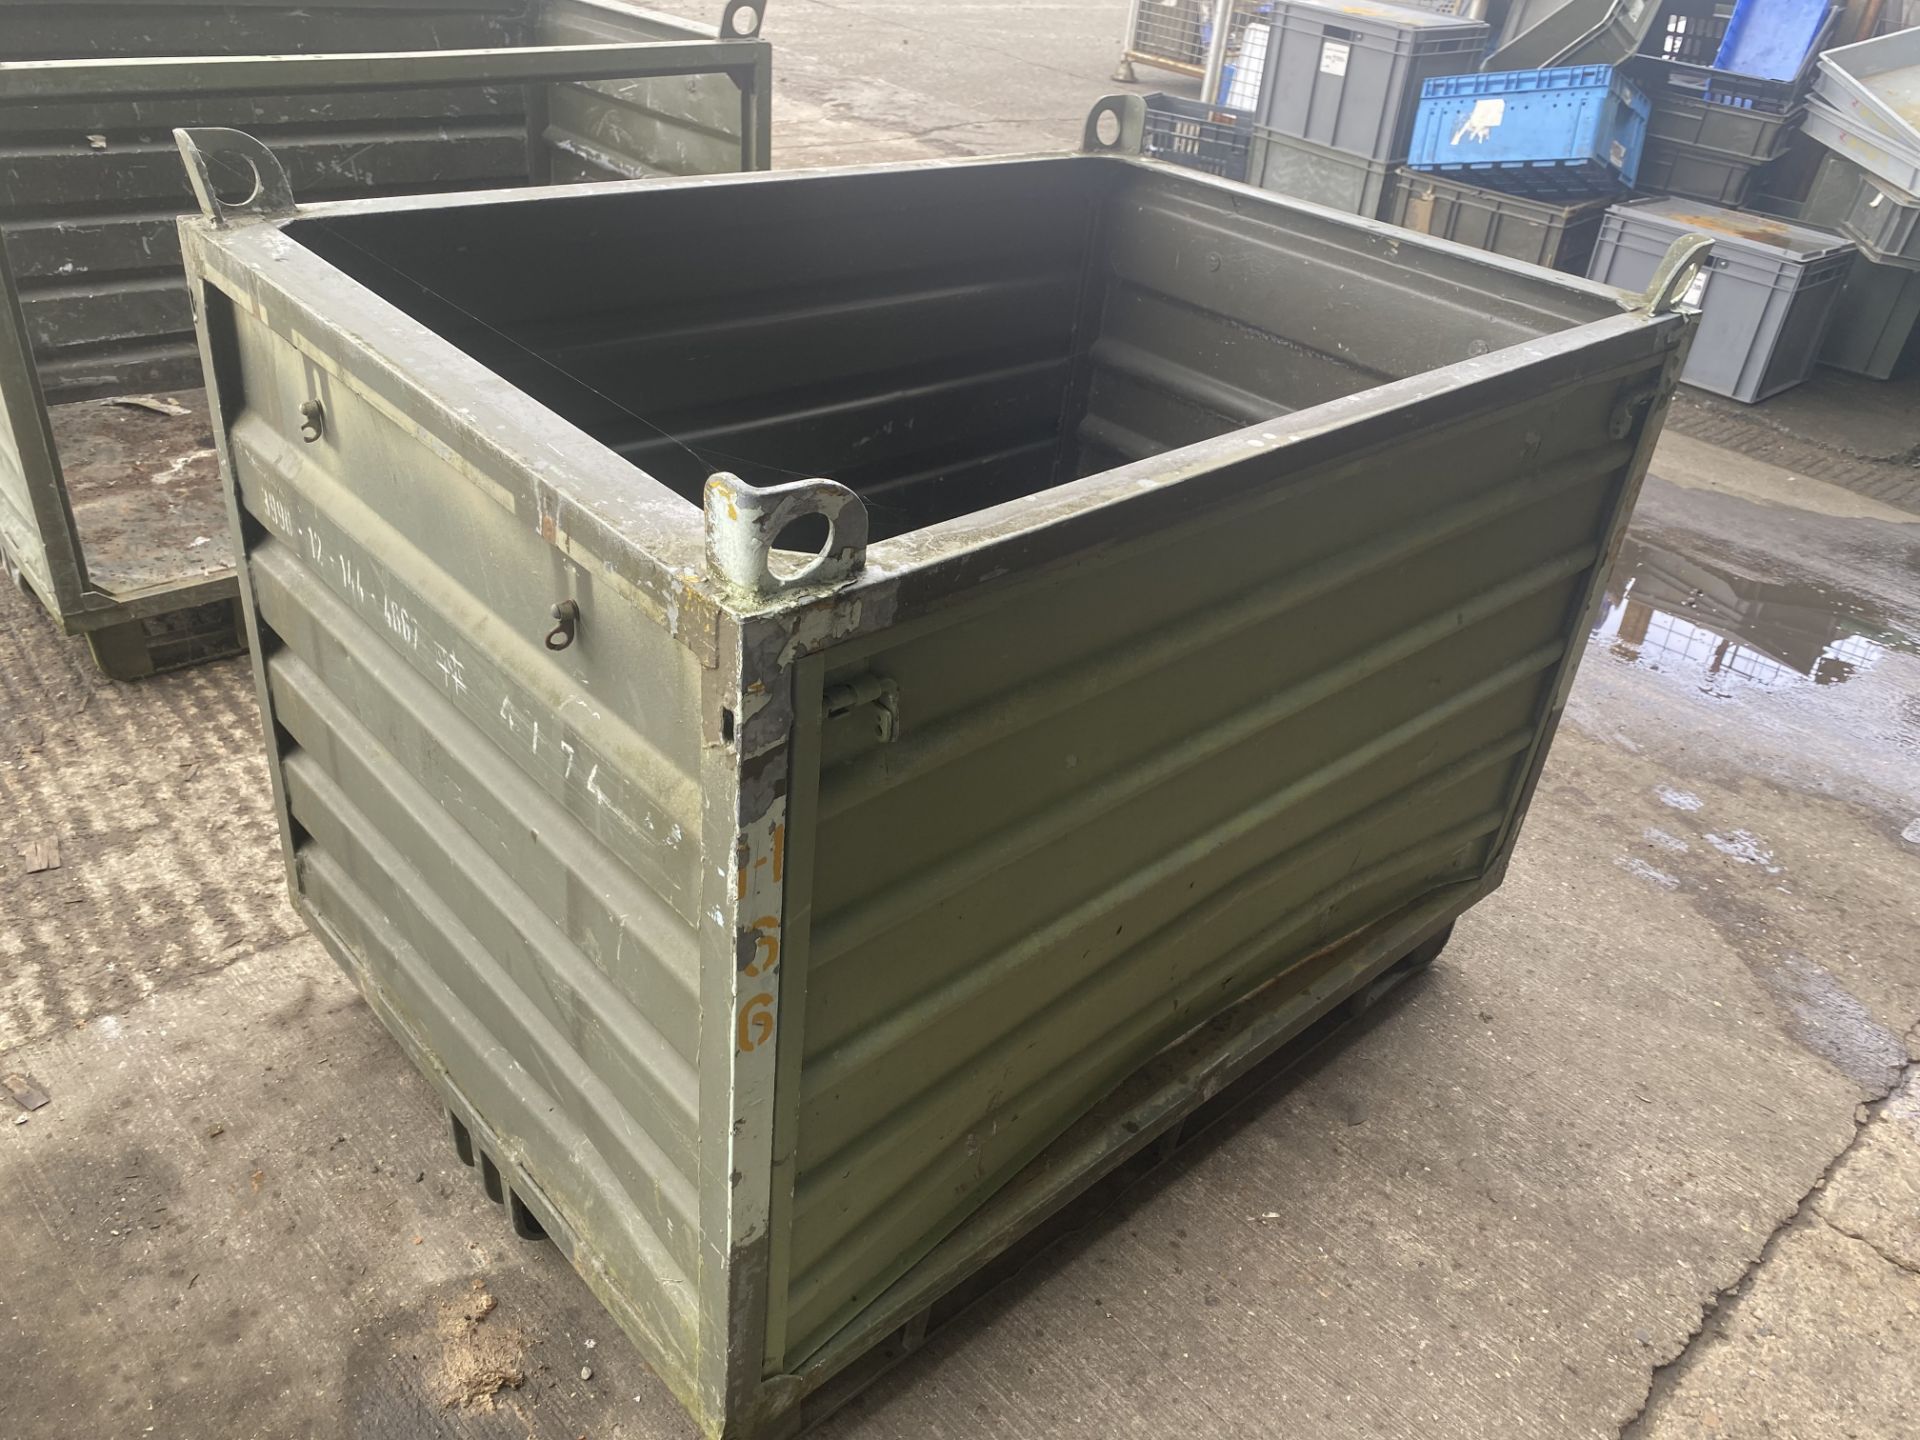 1 x Metal Storage / Transport Crate with Fold down side, Size 130 x 90 x 90 cm - Image 4 of 6